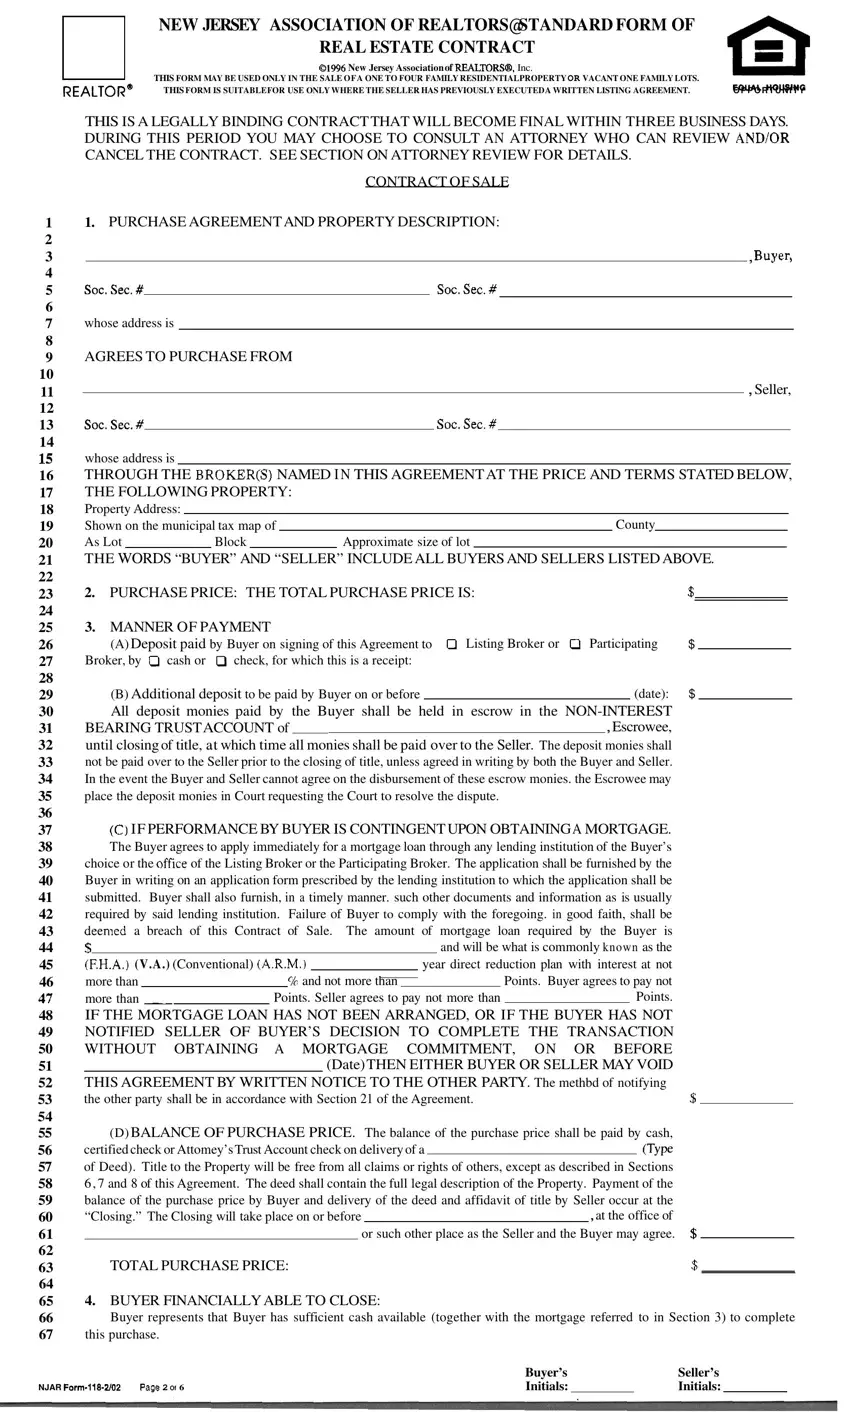 Njar Real Estate Contract Form first page preview